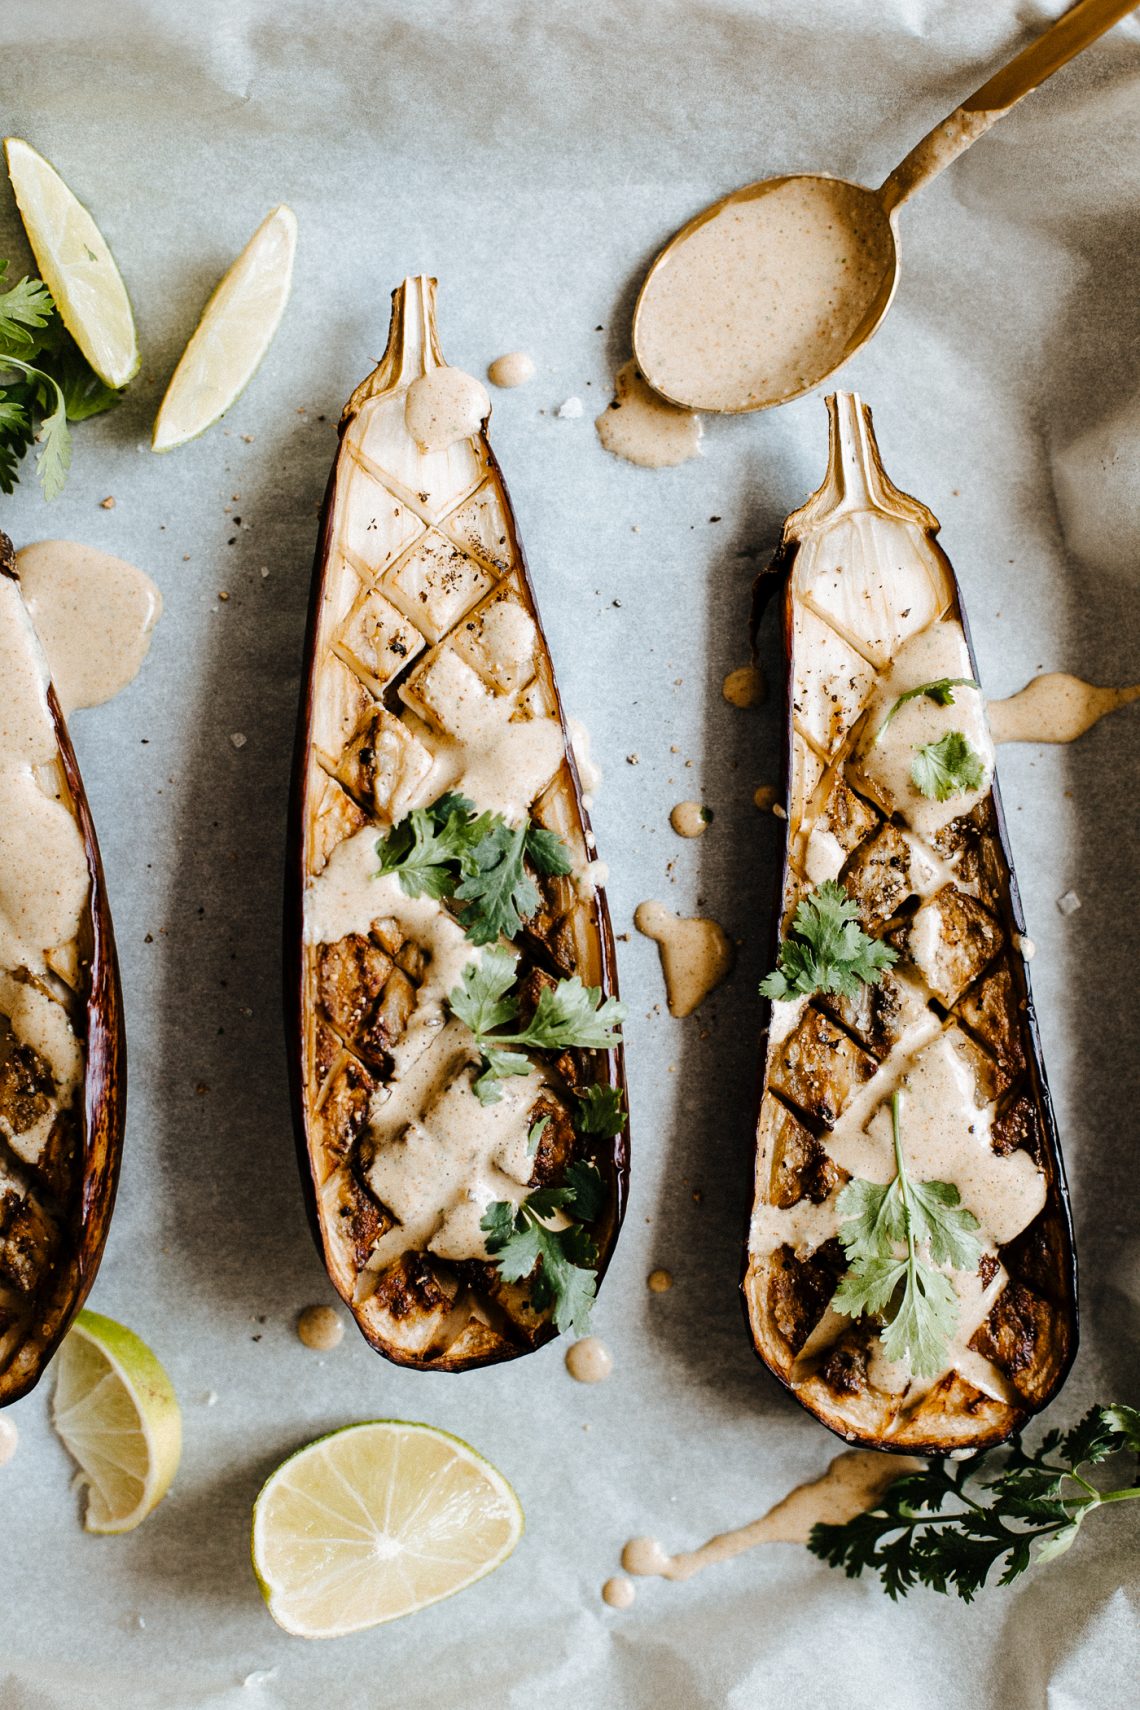 Grilled Eggplant with Nut-Sauce